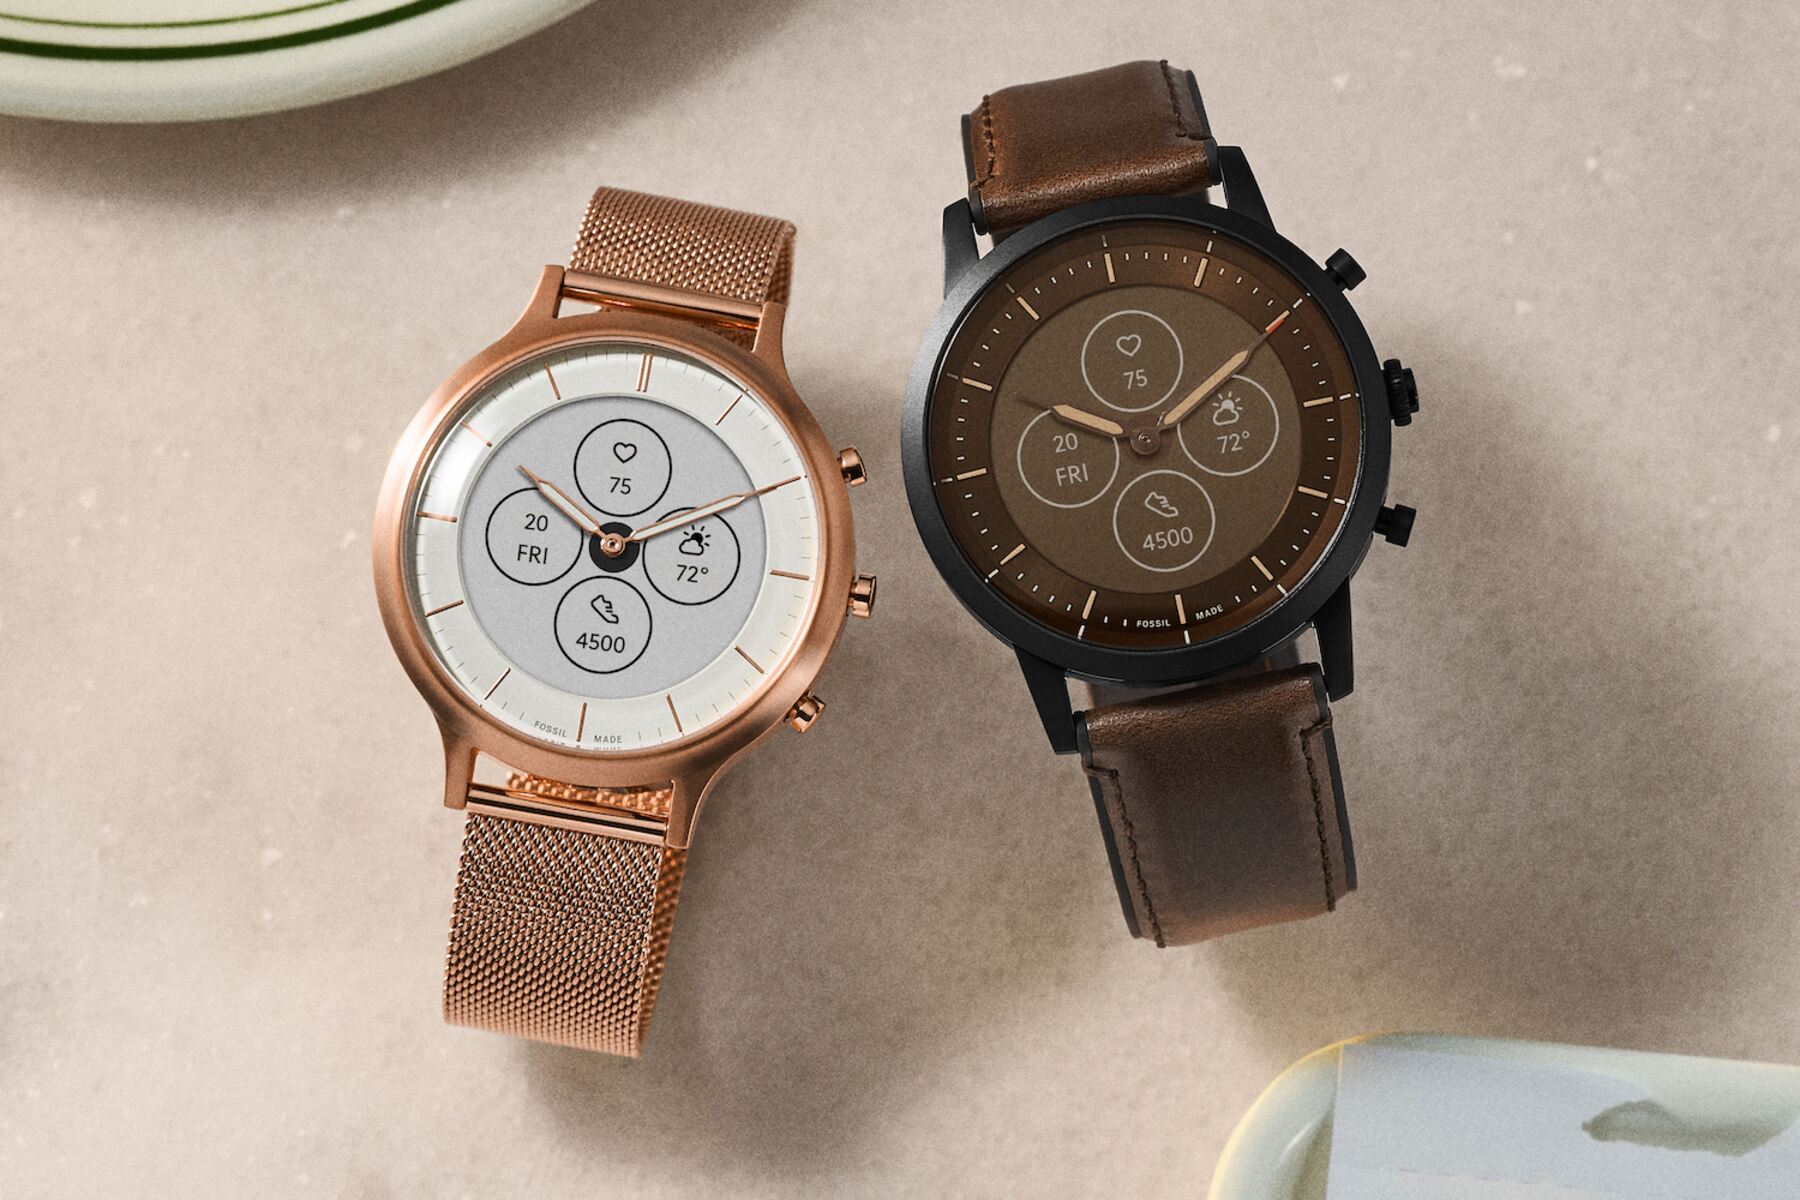 Hybrid Smartwatches: A Blend Of Style And Technology